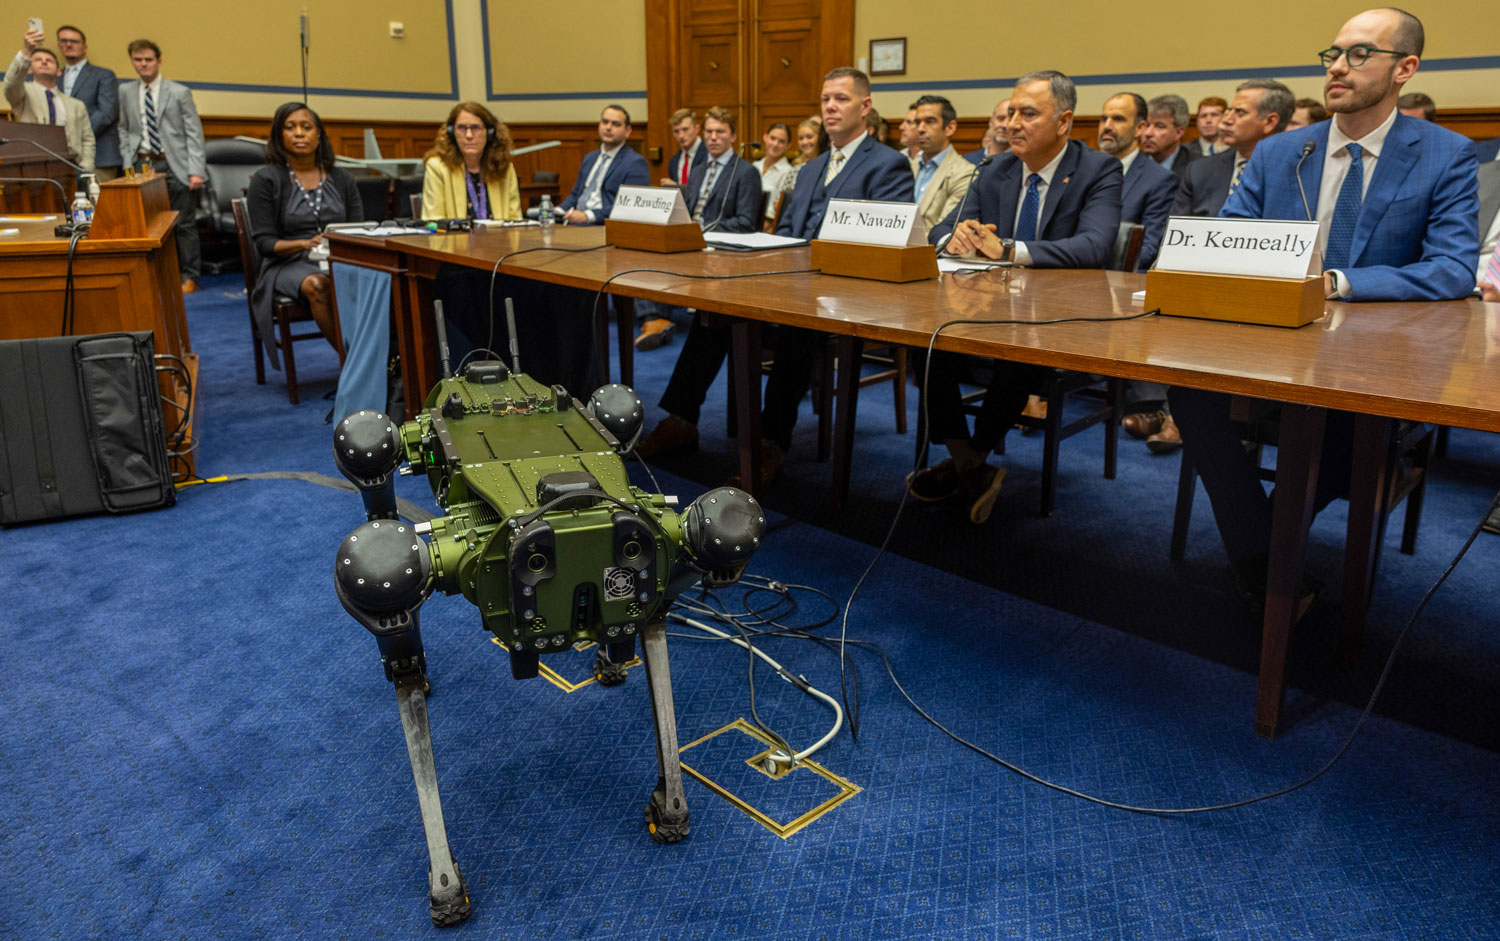 WASHINGTON, DC - JUNE 22: Gavin Kenneally, Chief Executive Officer at Ghost Robotics speaks as Vision 60 UGV walks in during a House hearing at the US Capitol on June 22, 2023 in Washington, DC. The House Committee on Oversight and Accountbility Subcommittee on Cybersecurity, Information Technology, and Government Innovation met to discuss the use of technology at the US Border, airports and military bases. (Photo by Tasos Katopodis/Getty Images)